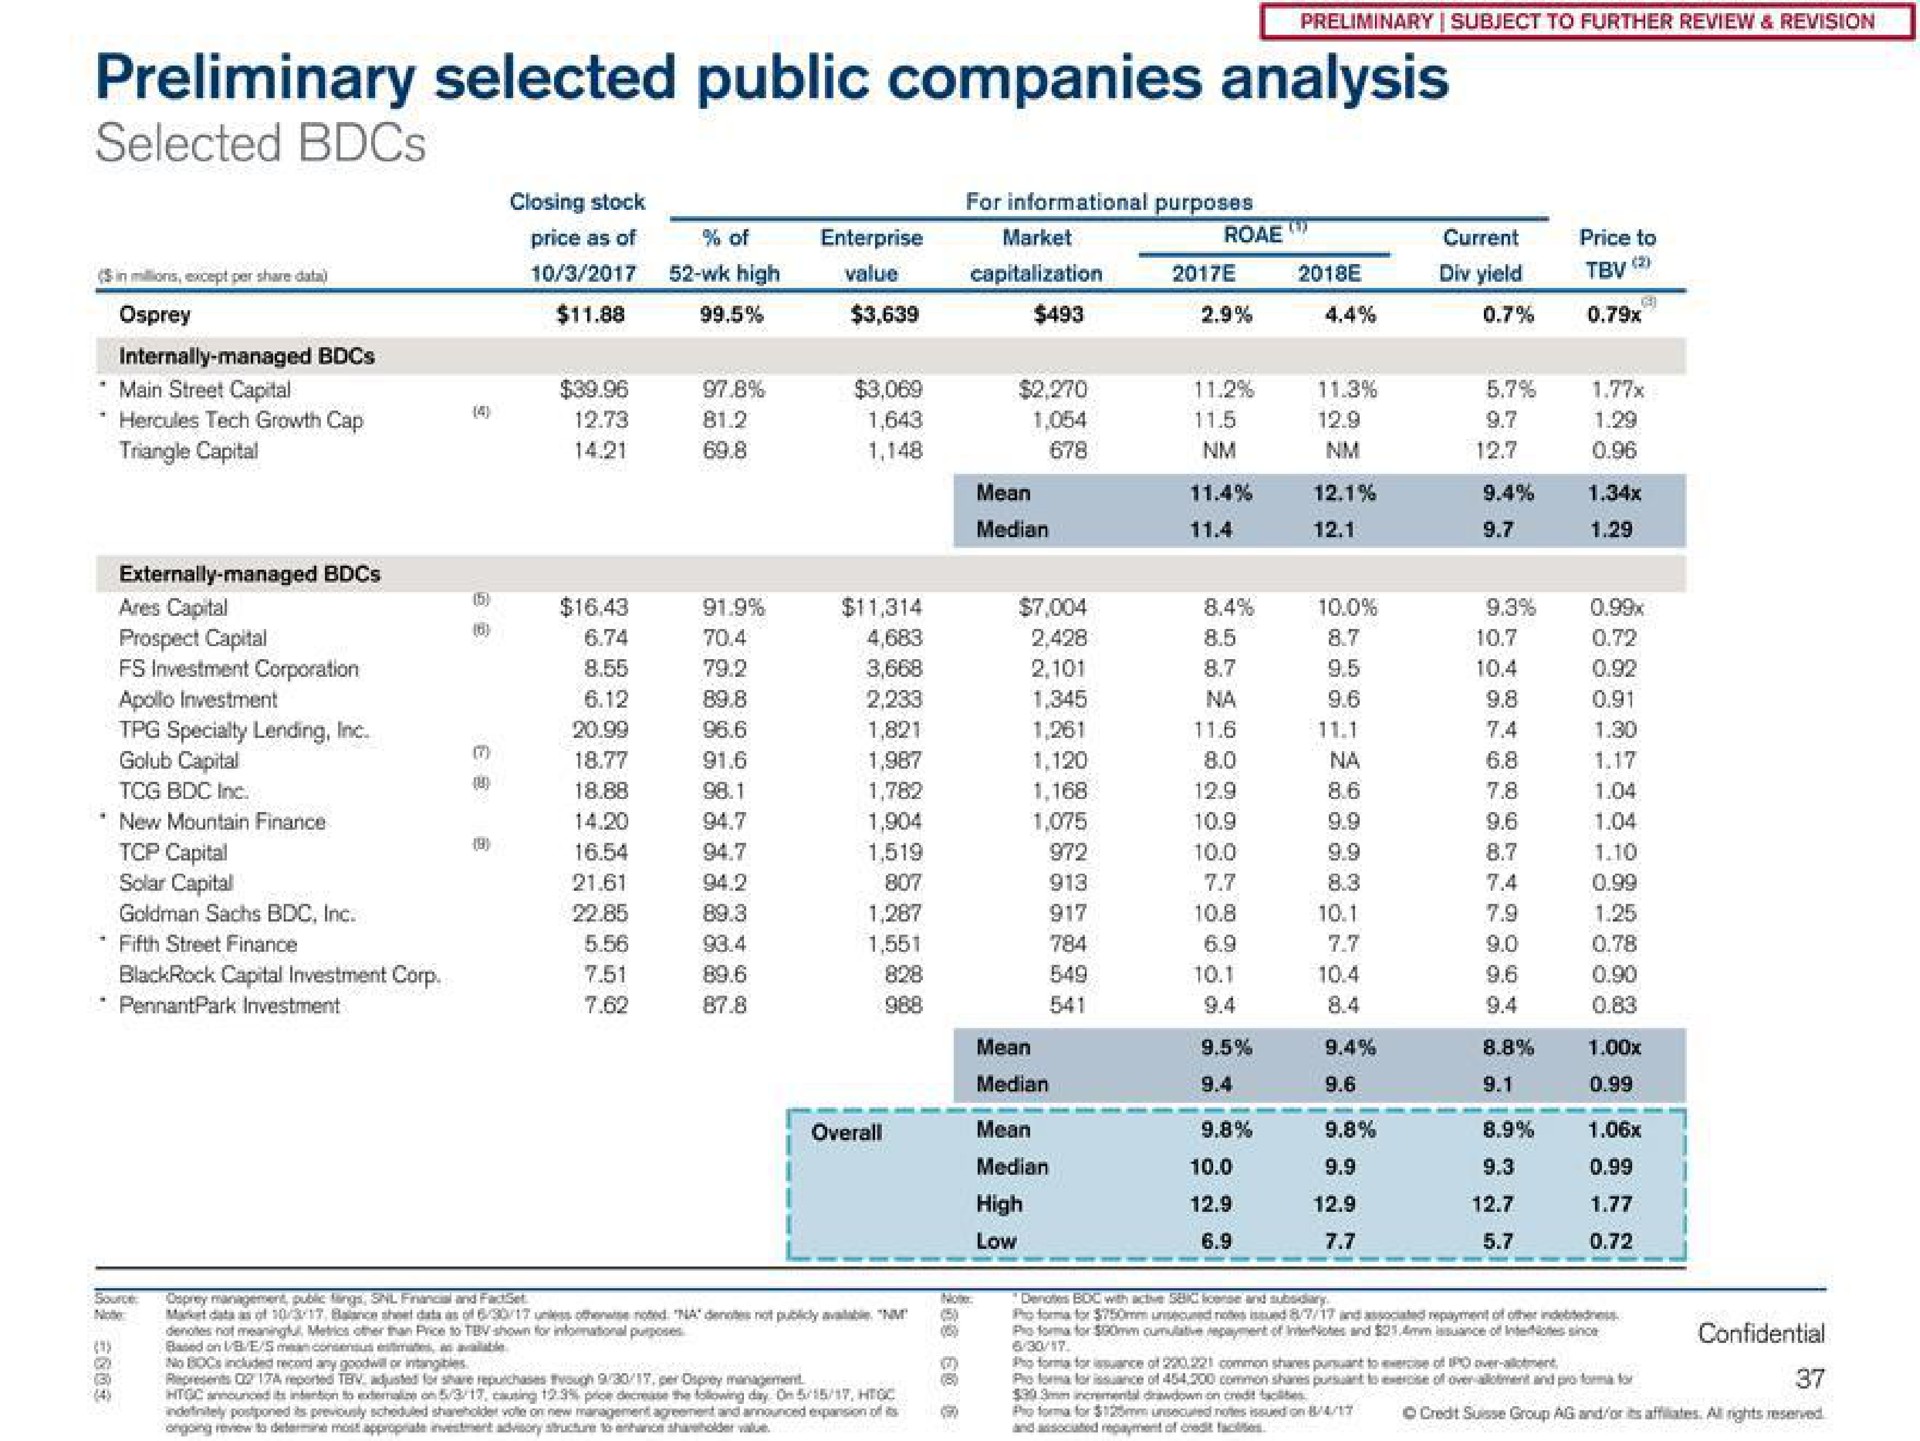 preliminary selected public companies analysis selected mean | Credit Suisse